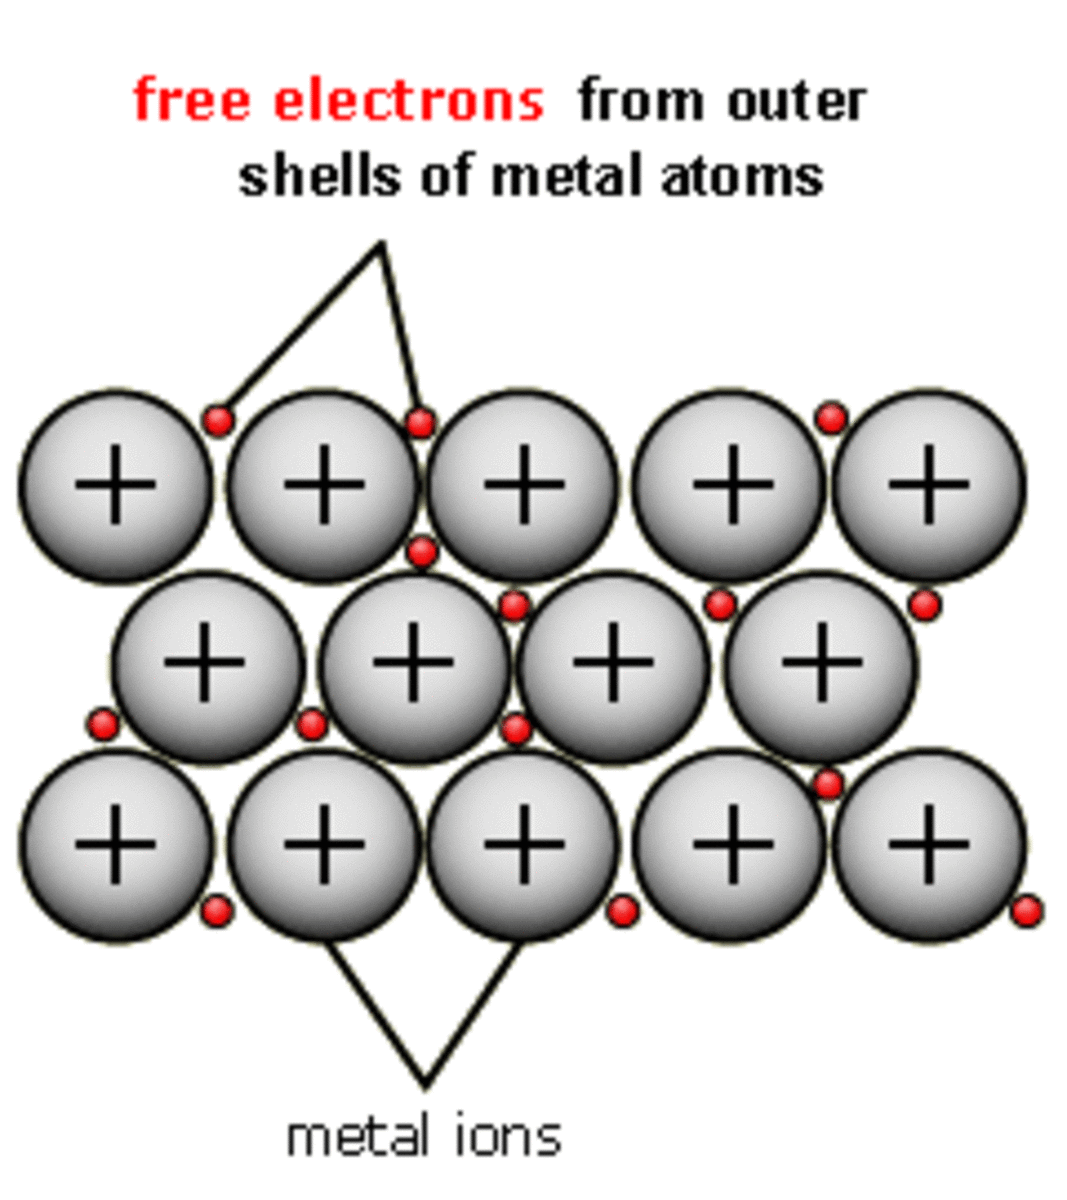 Held in a Sea of Electrons